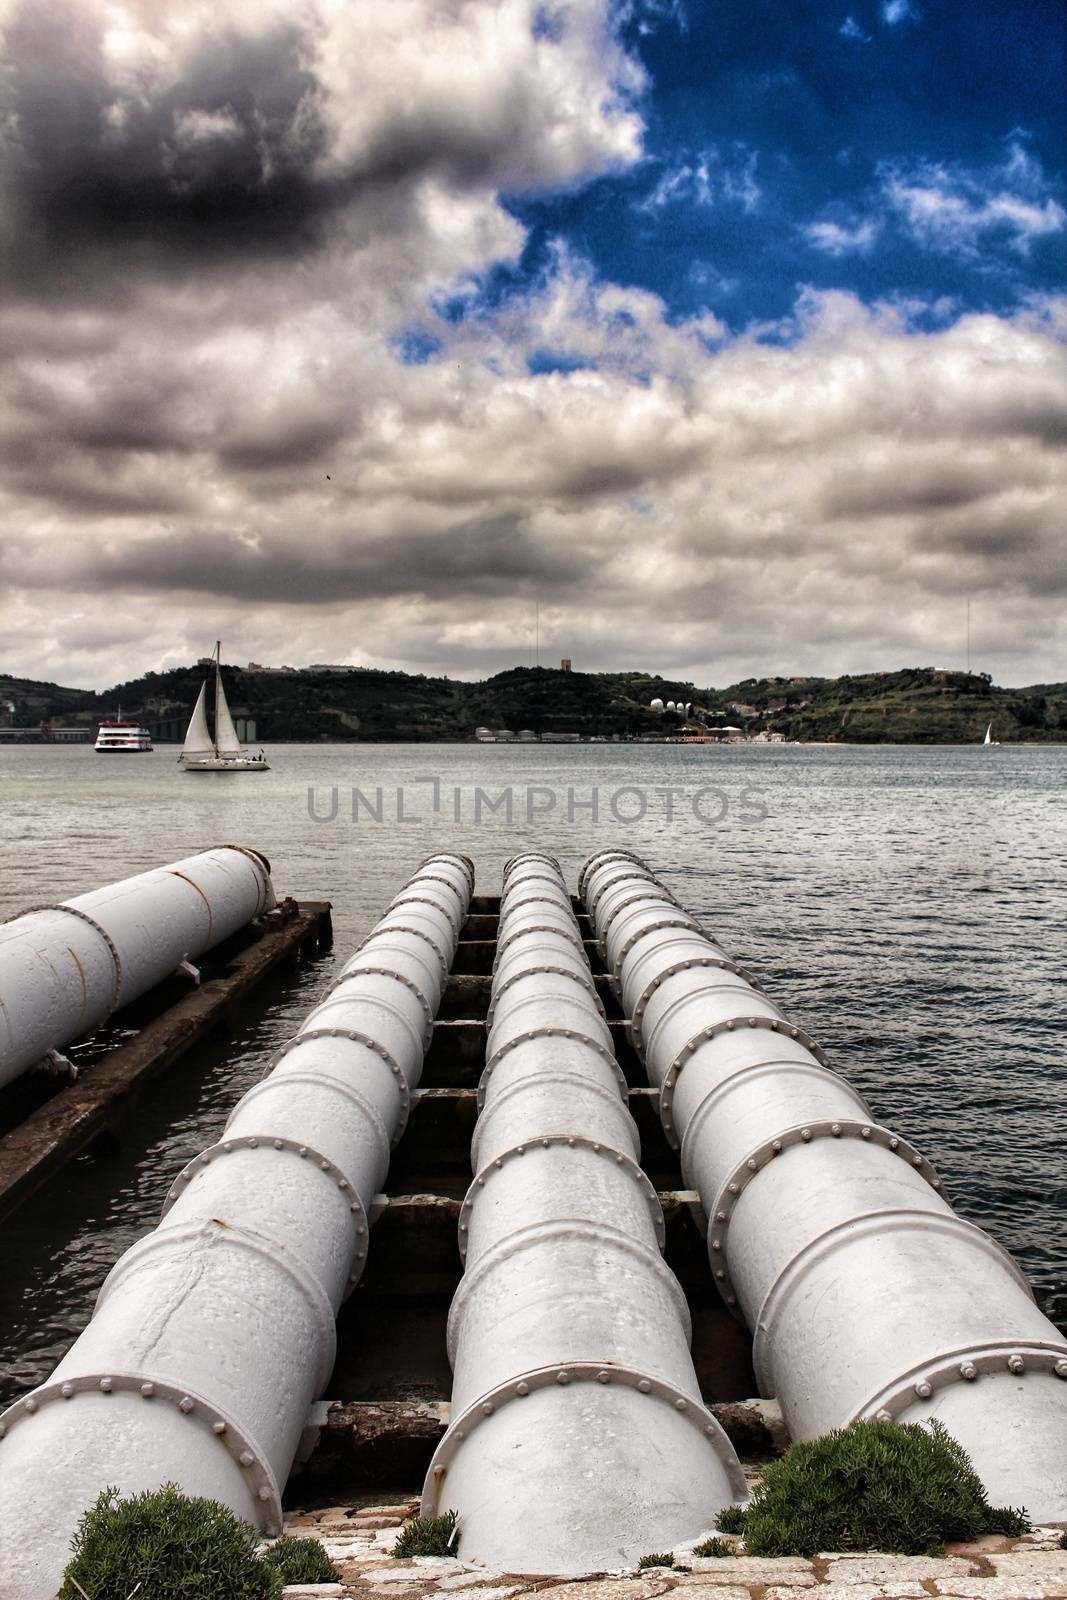 Drain pipes on the banks of The Tagus River by soniabonet